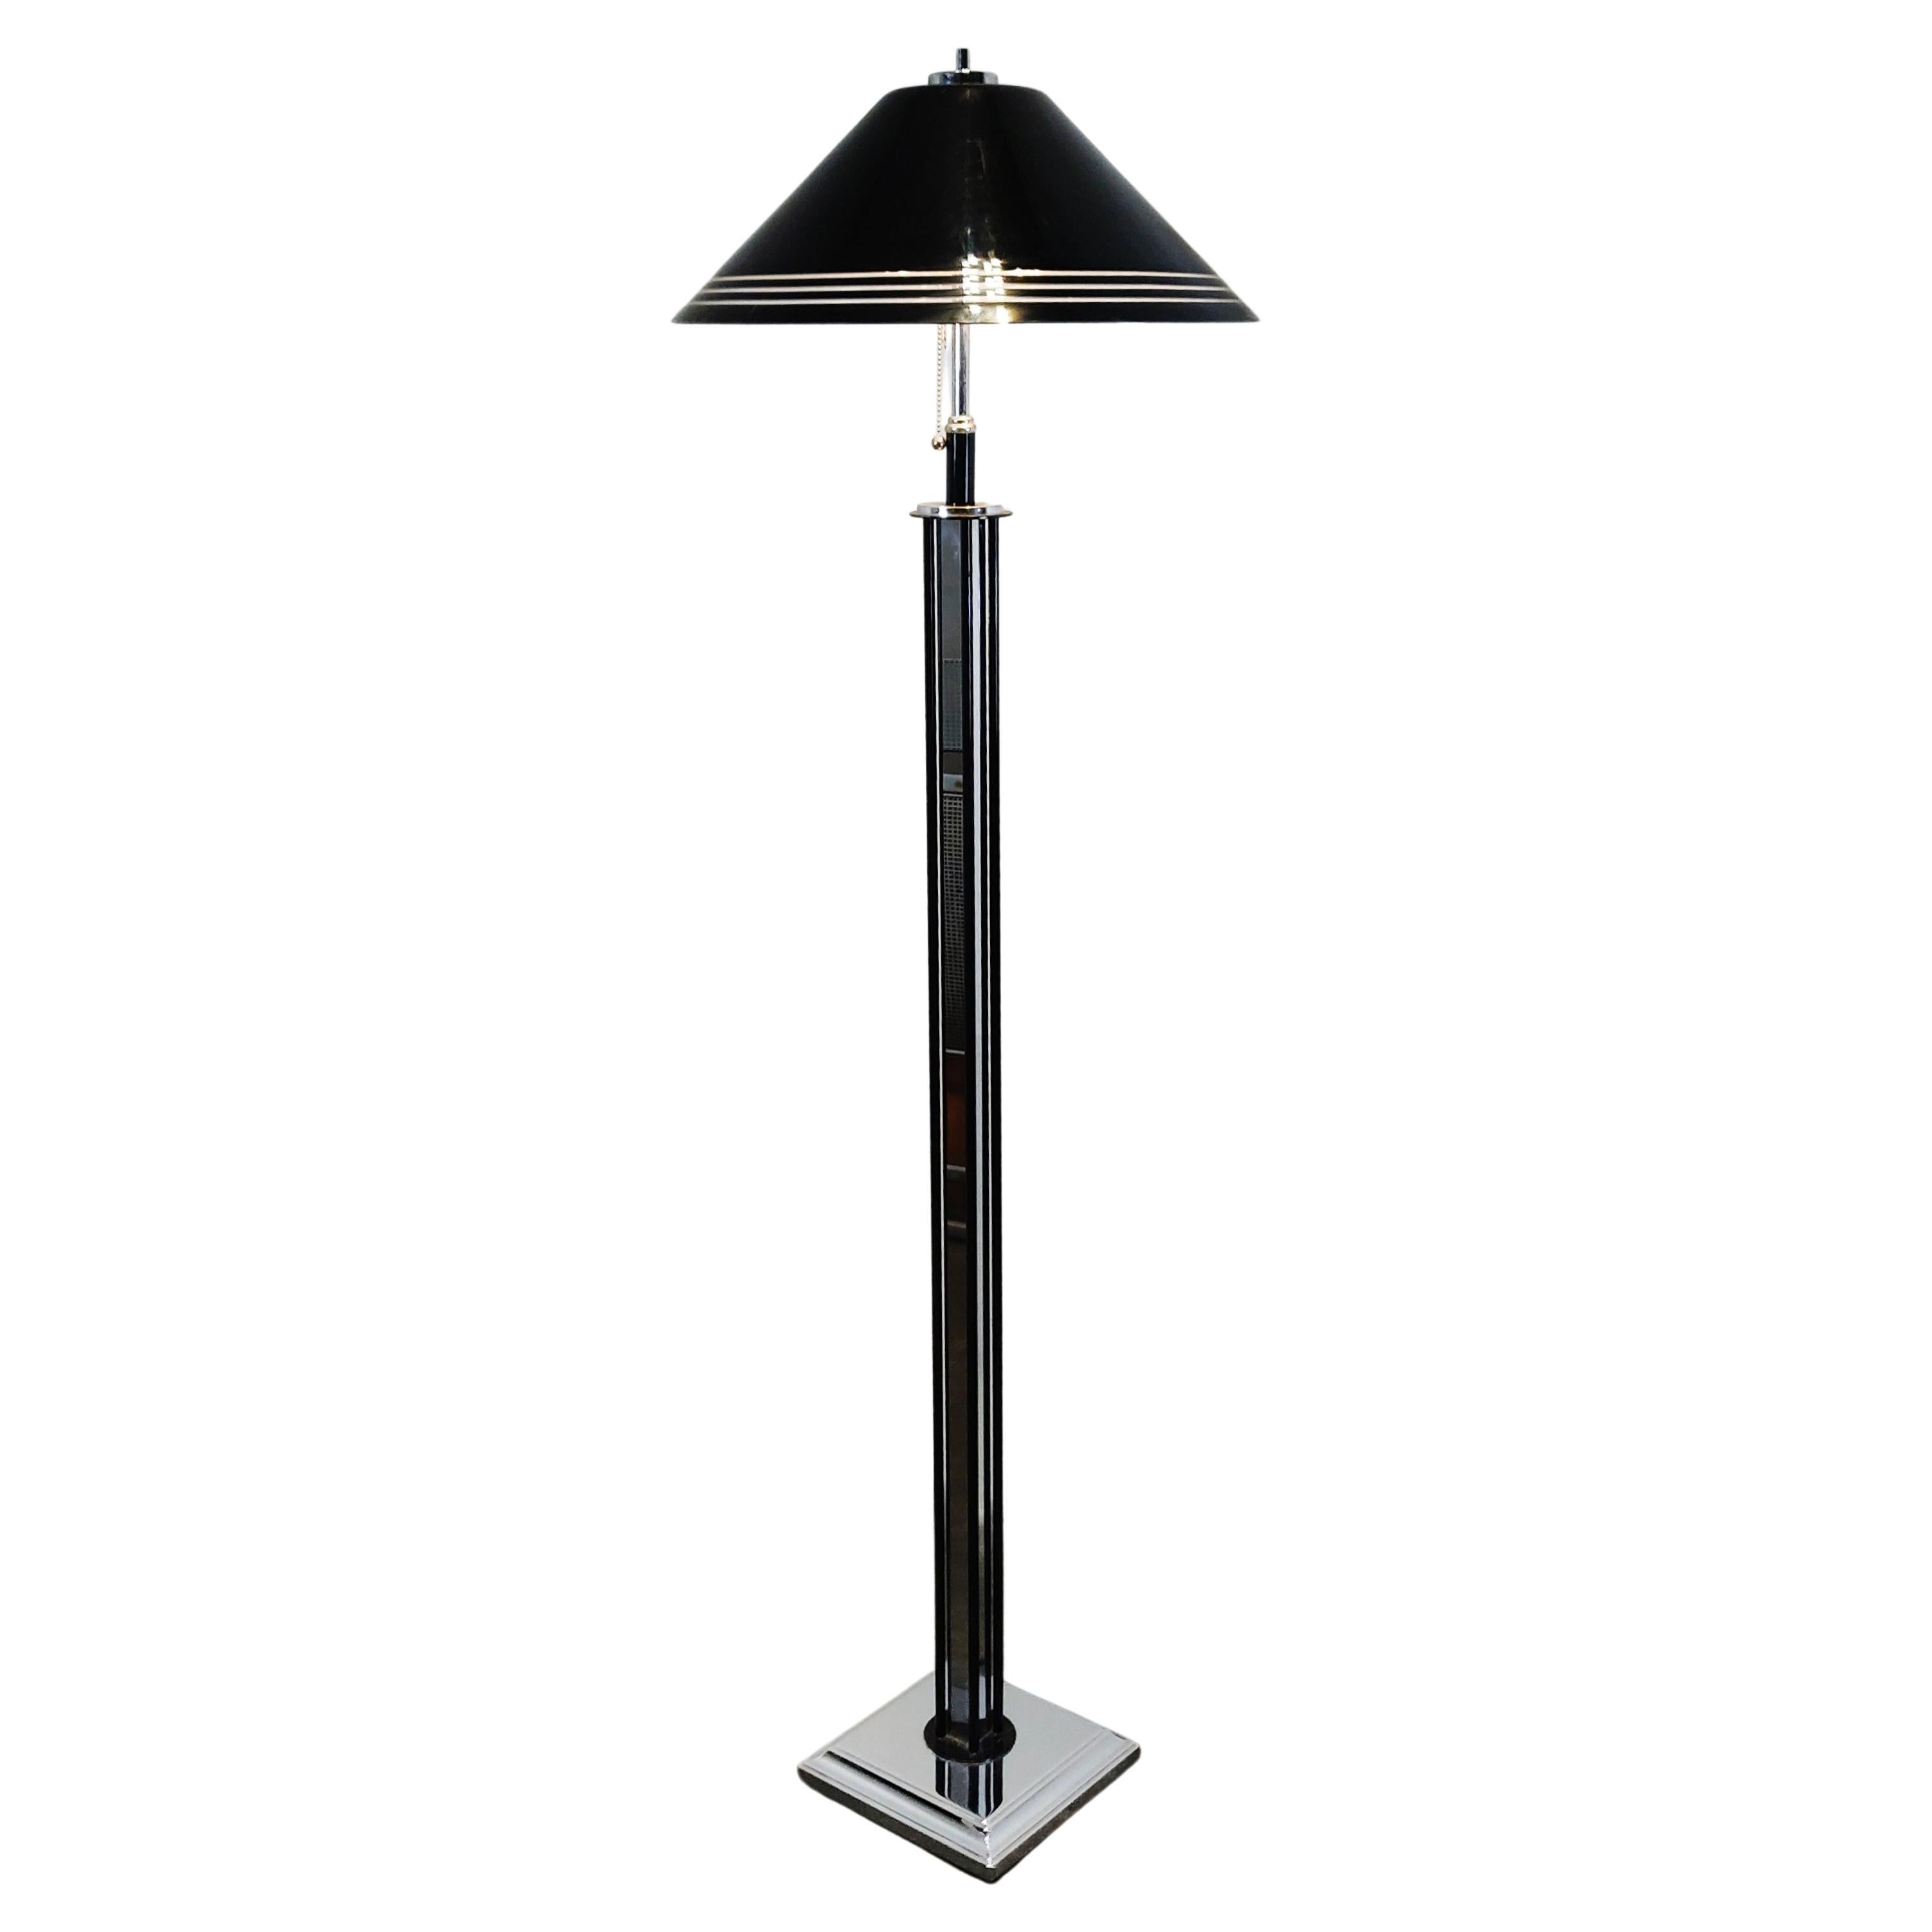 20th Century Hollywood Regency Floor Lamp in style of Willy Rizzo. For Sale